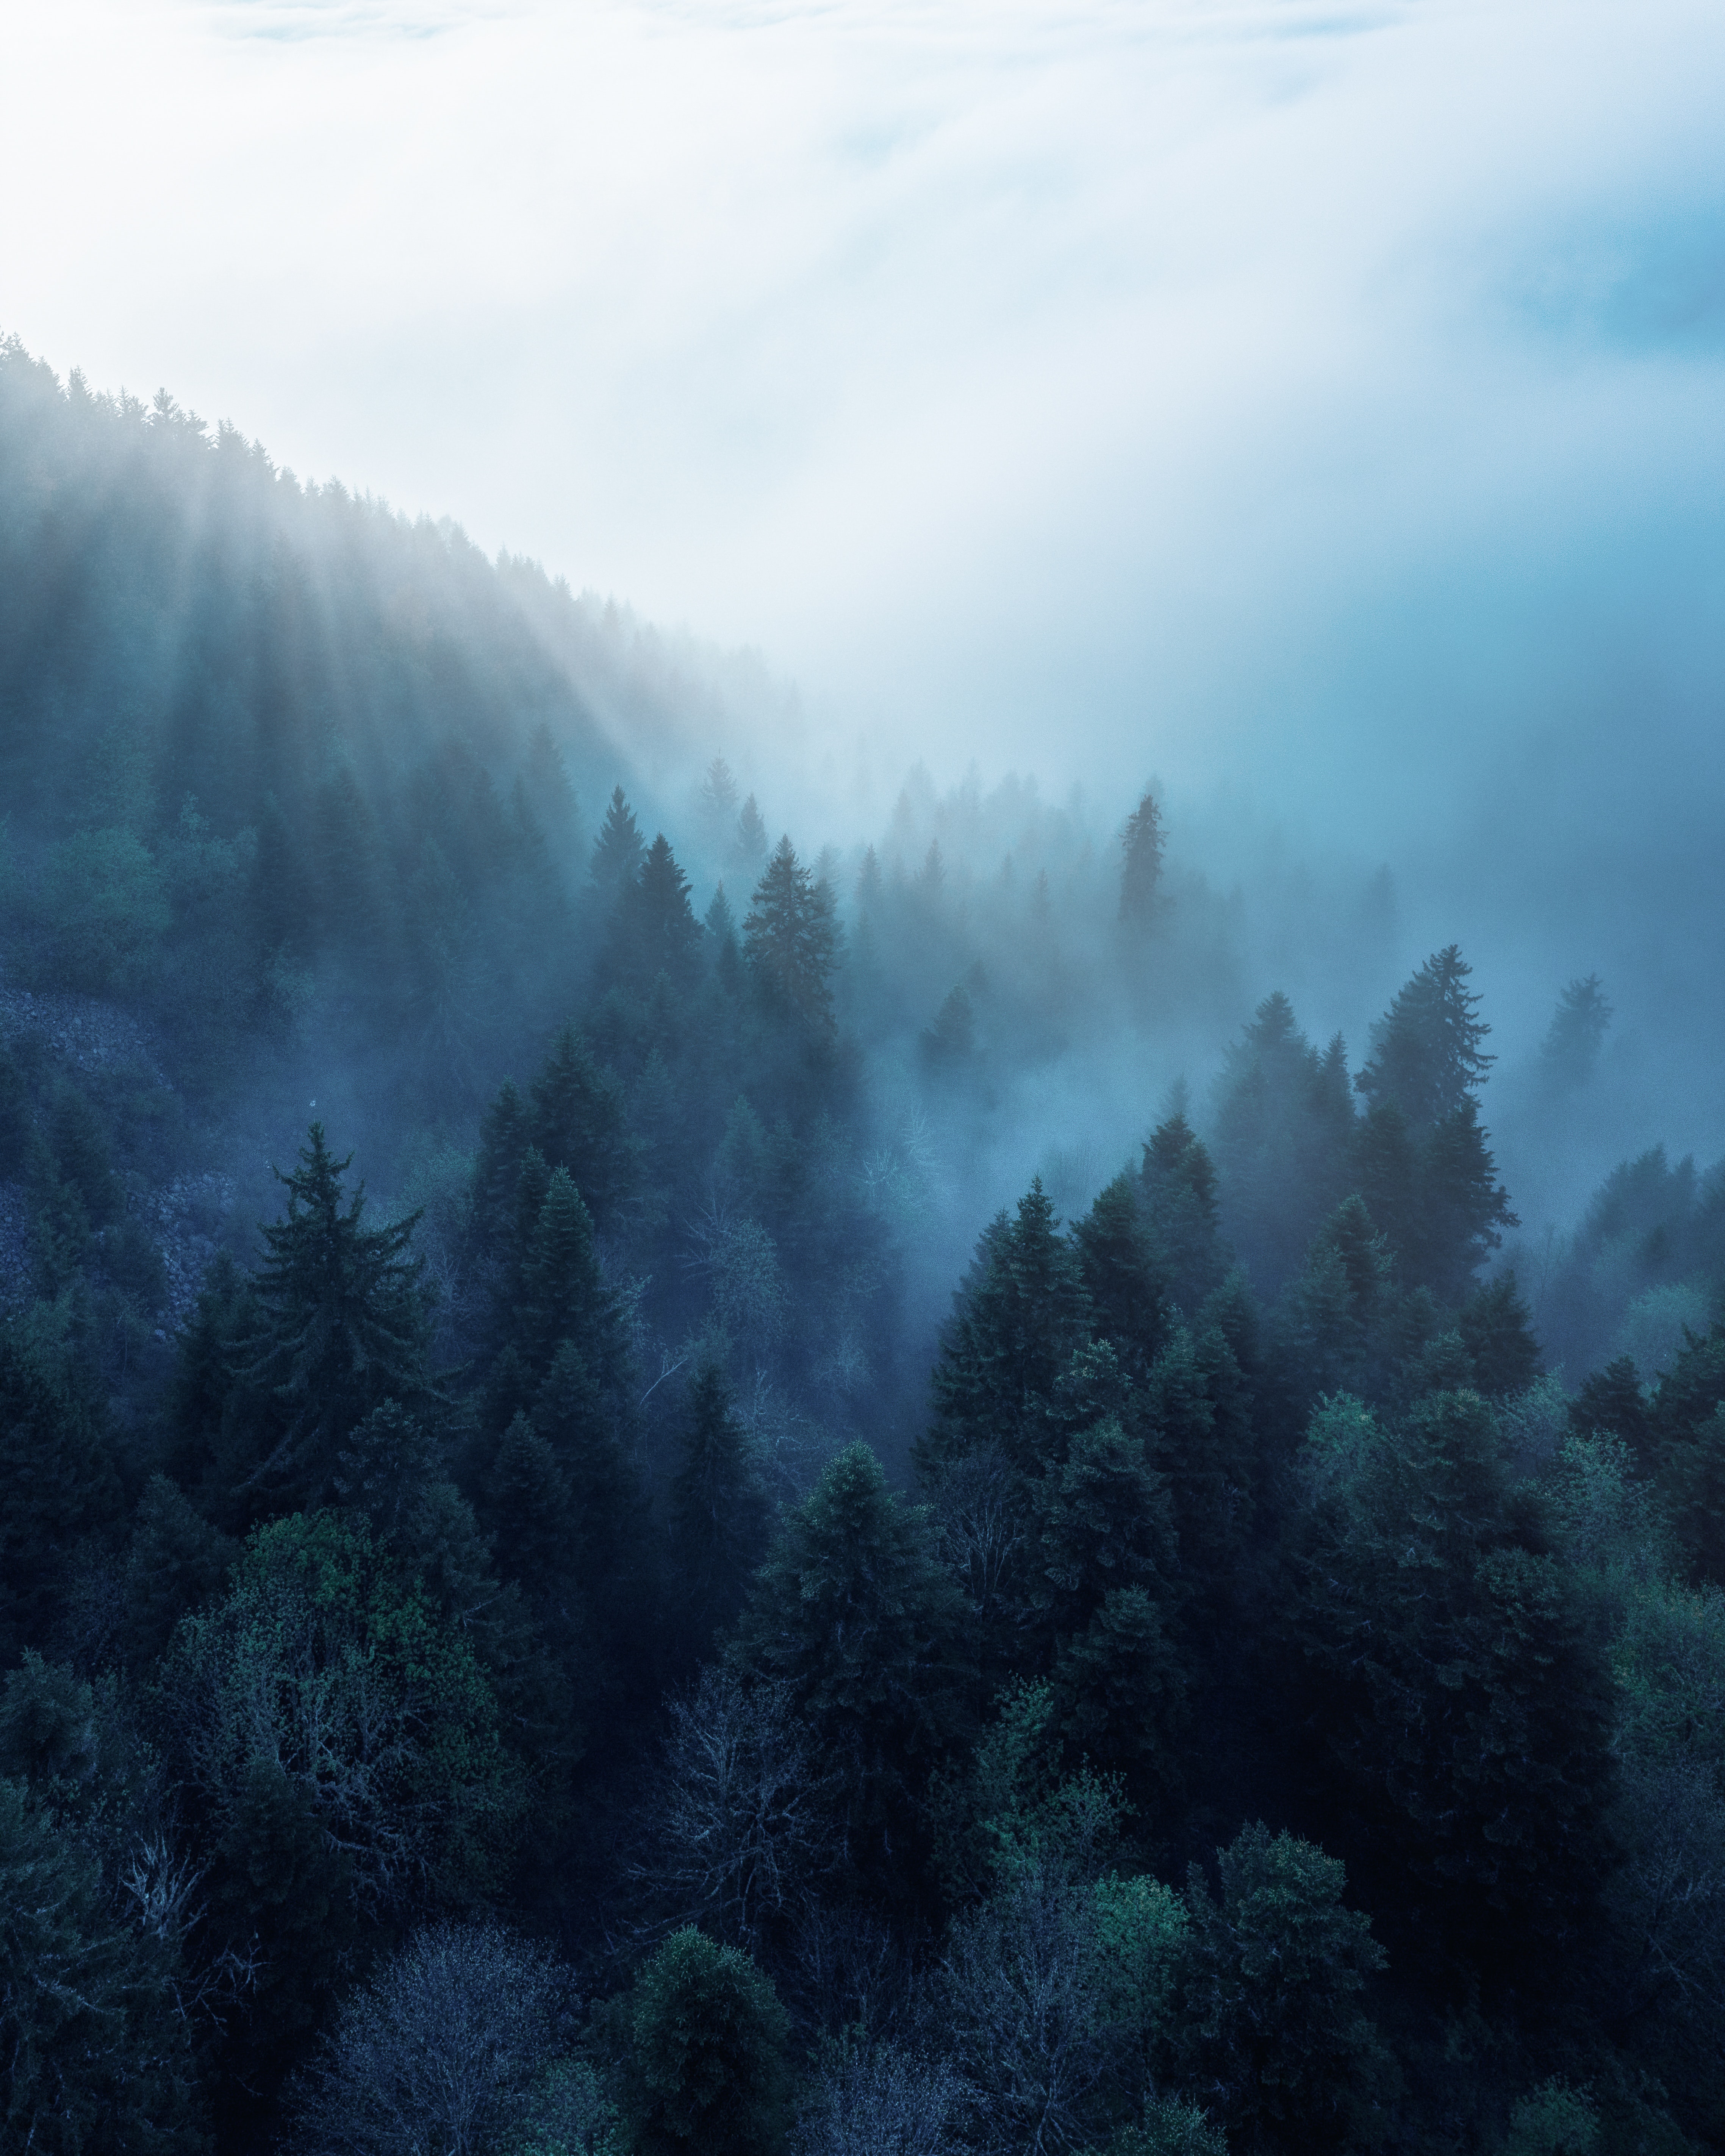 android rays, fog, forest, trees, nature, beams